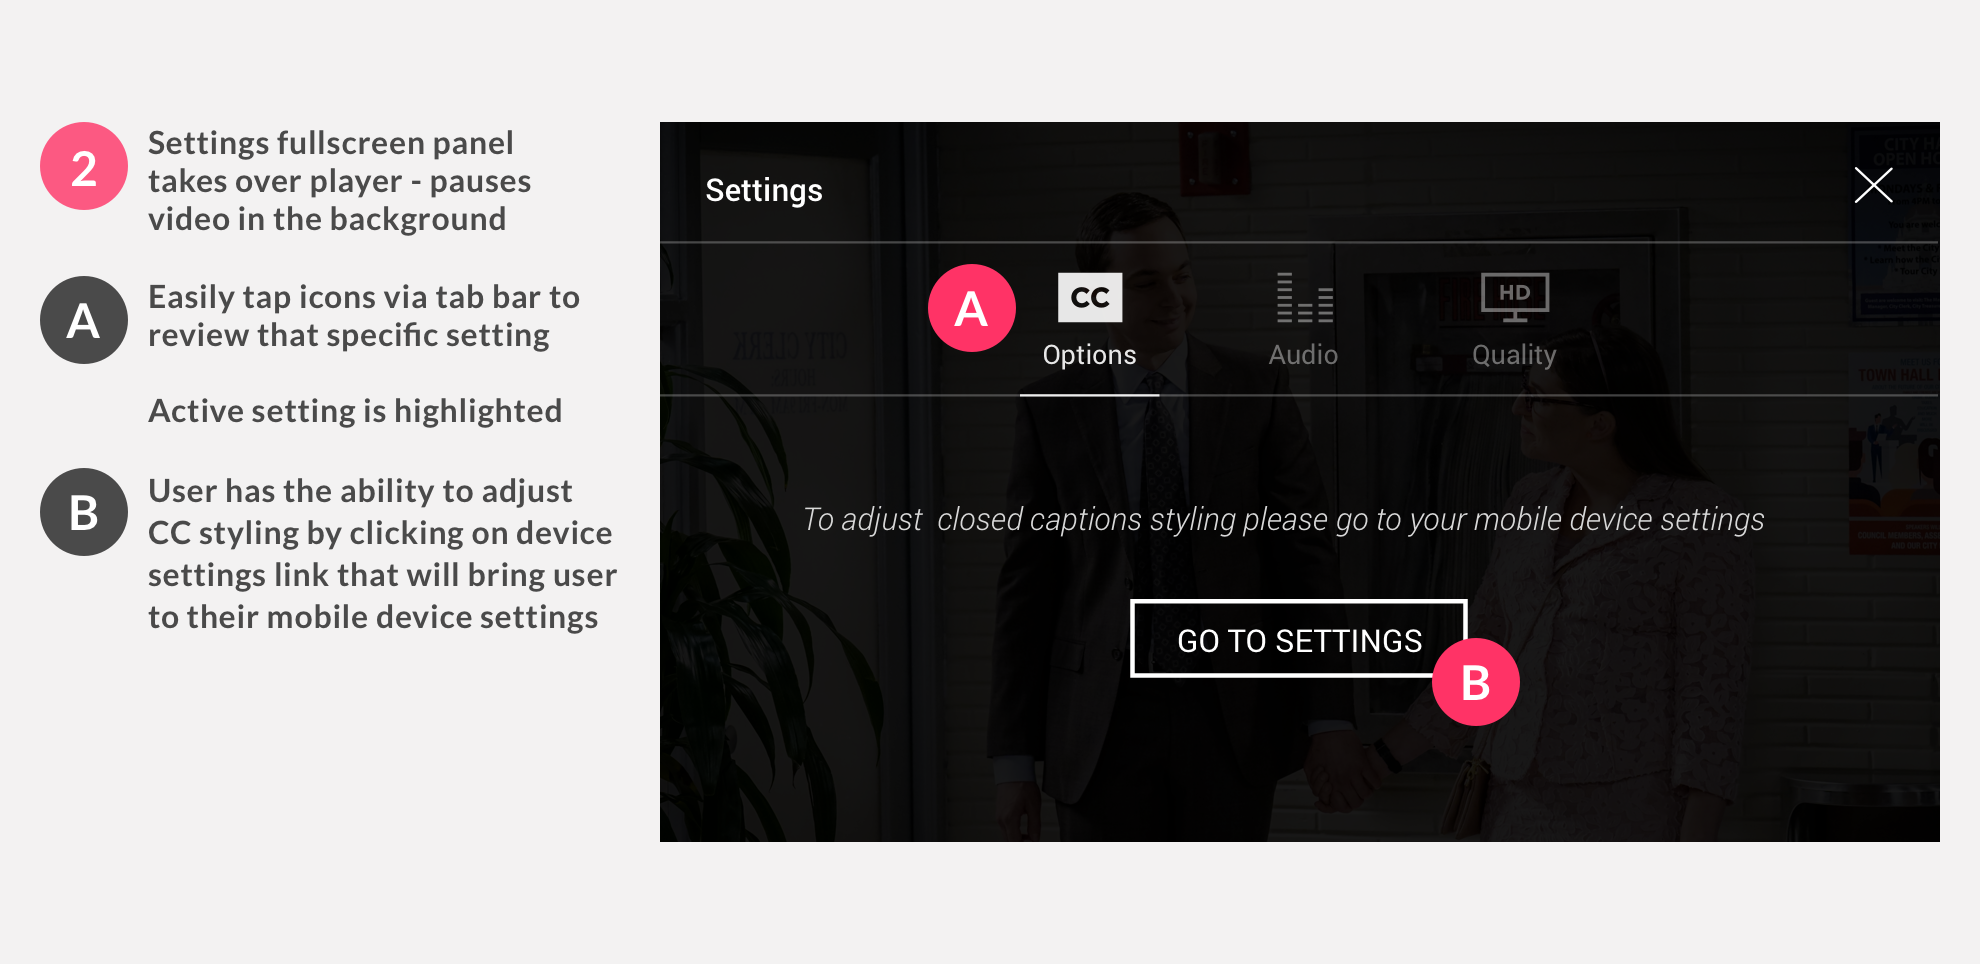 06-mobile-android-settings-flow-ux@2x